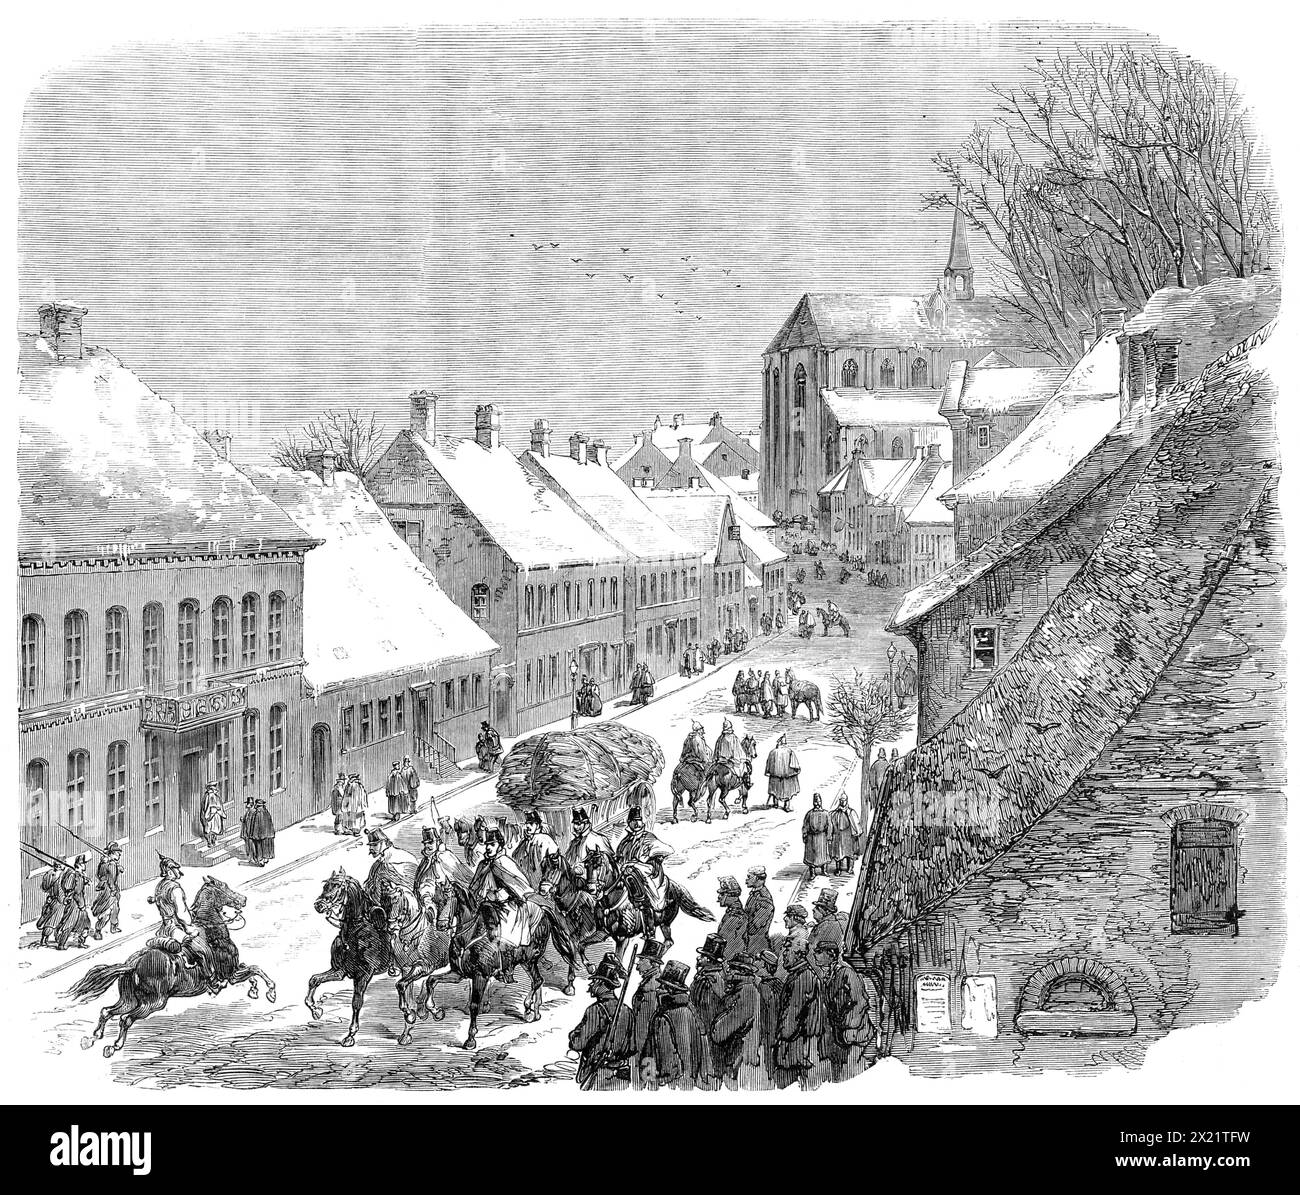 The War in Schleswig: High-Street, Hadersleben - from a sketch by our special artist, 1864. View of '...the principal street of Hadersleben, now the head-quarters of the allied Prussian and Austrian armies. This town, which is situated upon a gulf or inlet of the Baltic Sea, on the eastern coast of Schleswig, has a population of about six thousand souls. It is partly built on a small island, connected by bridges with the other portion of the town. Hence it was anciently called the Venice of Denmark, and the figure of the bridge is displayed among the heraldic insignia of the town. Its municipa Stock Photo